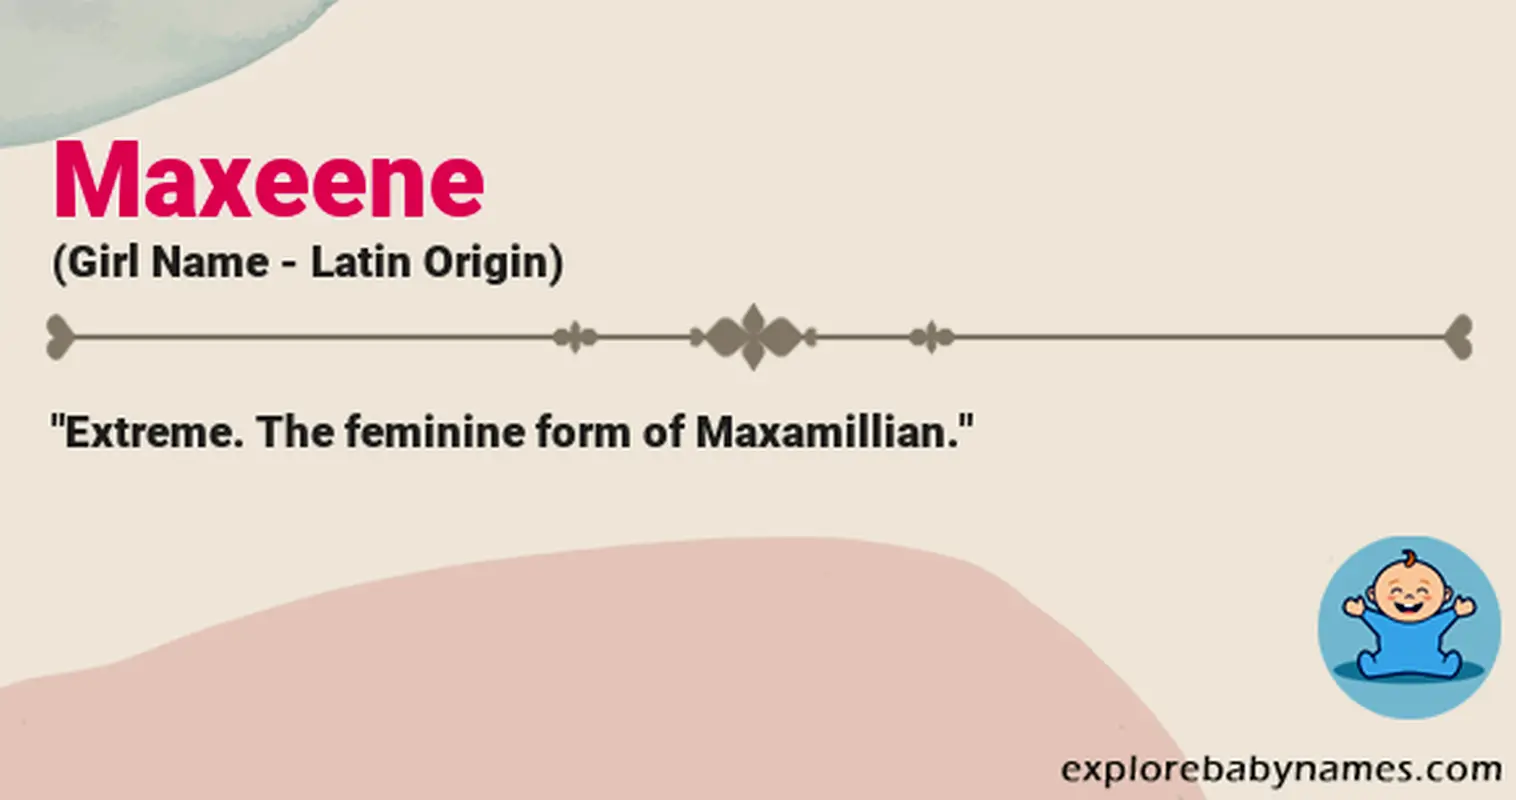 Meaning of Maxeene